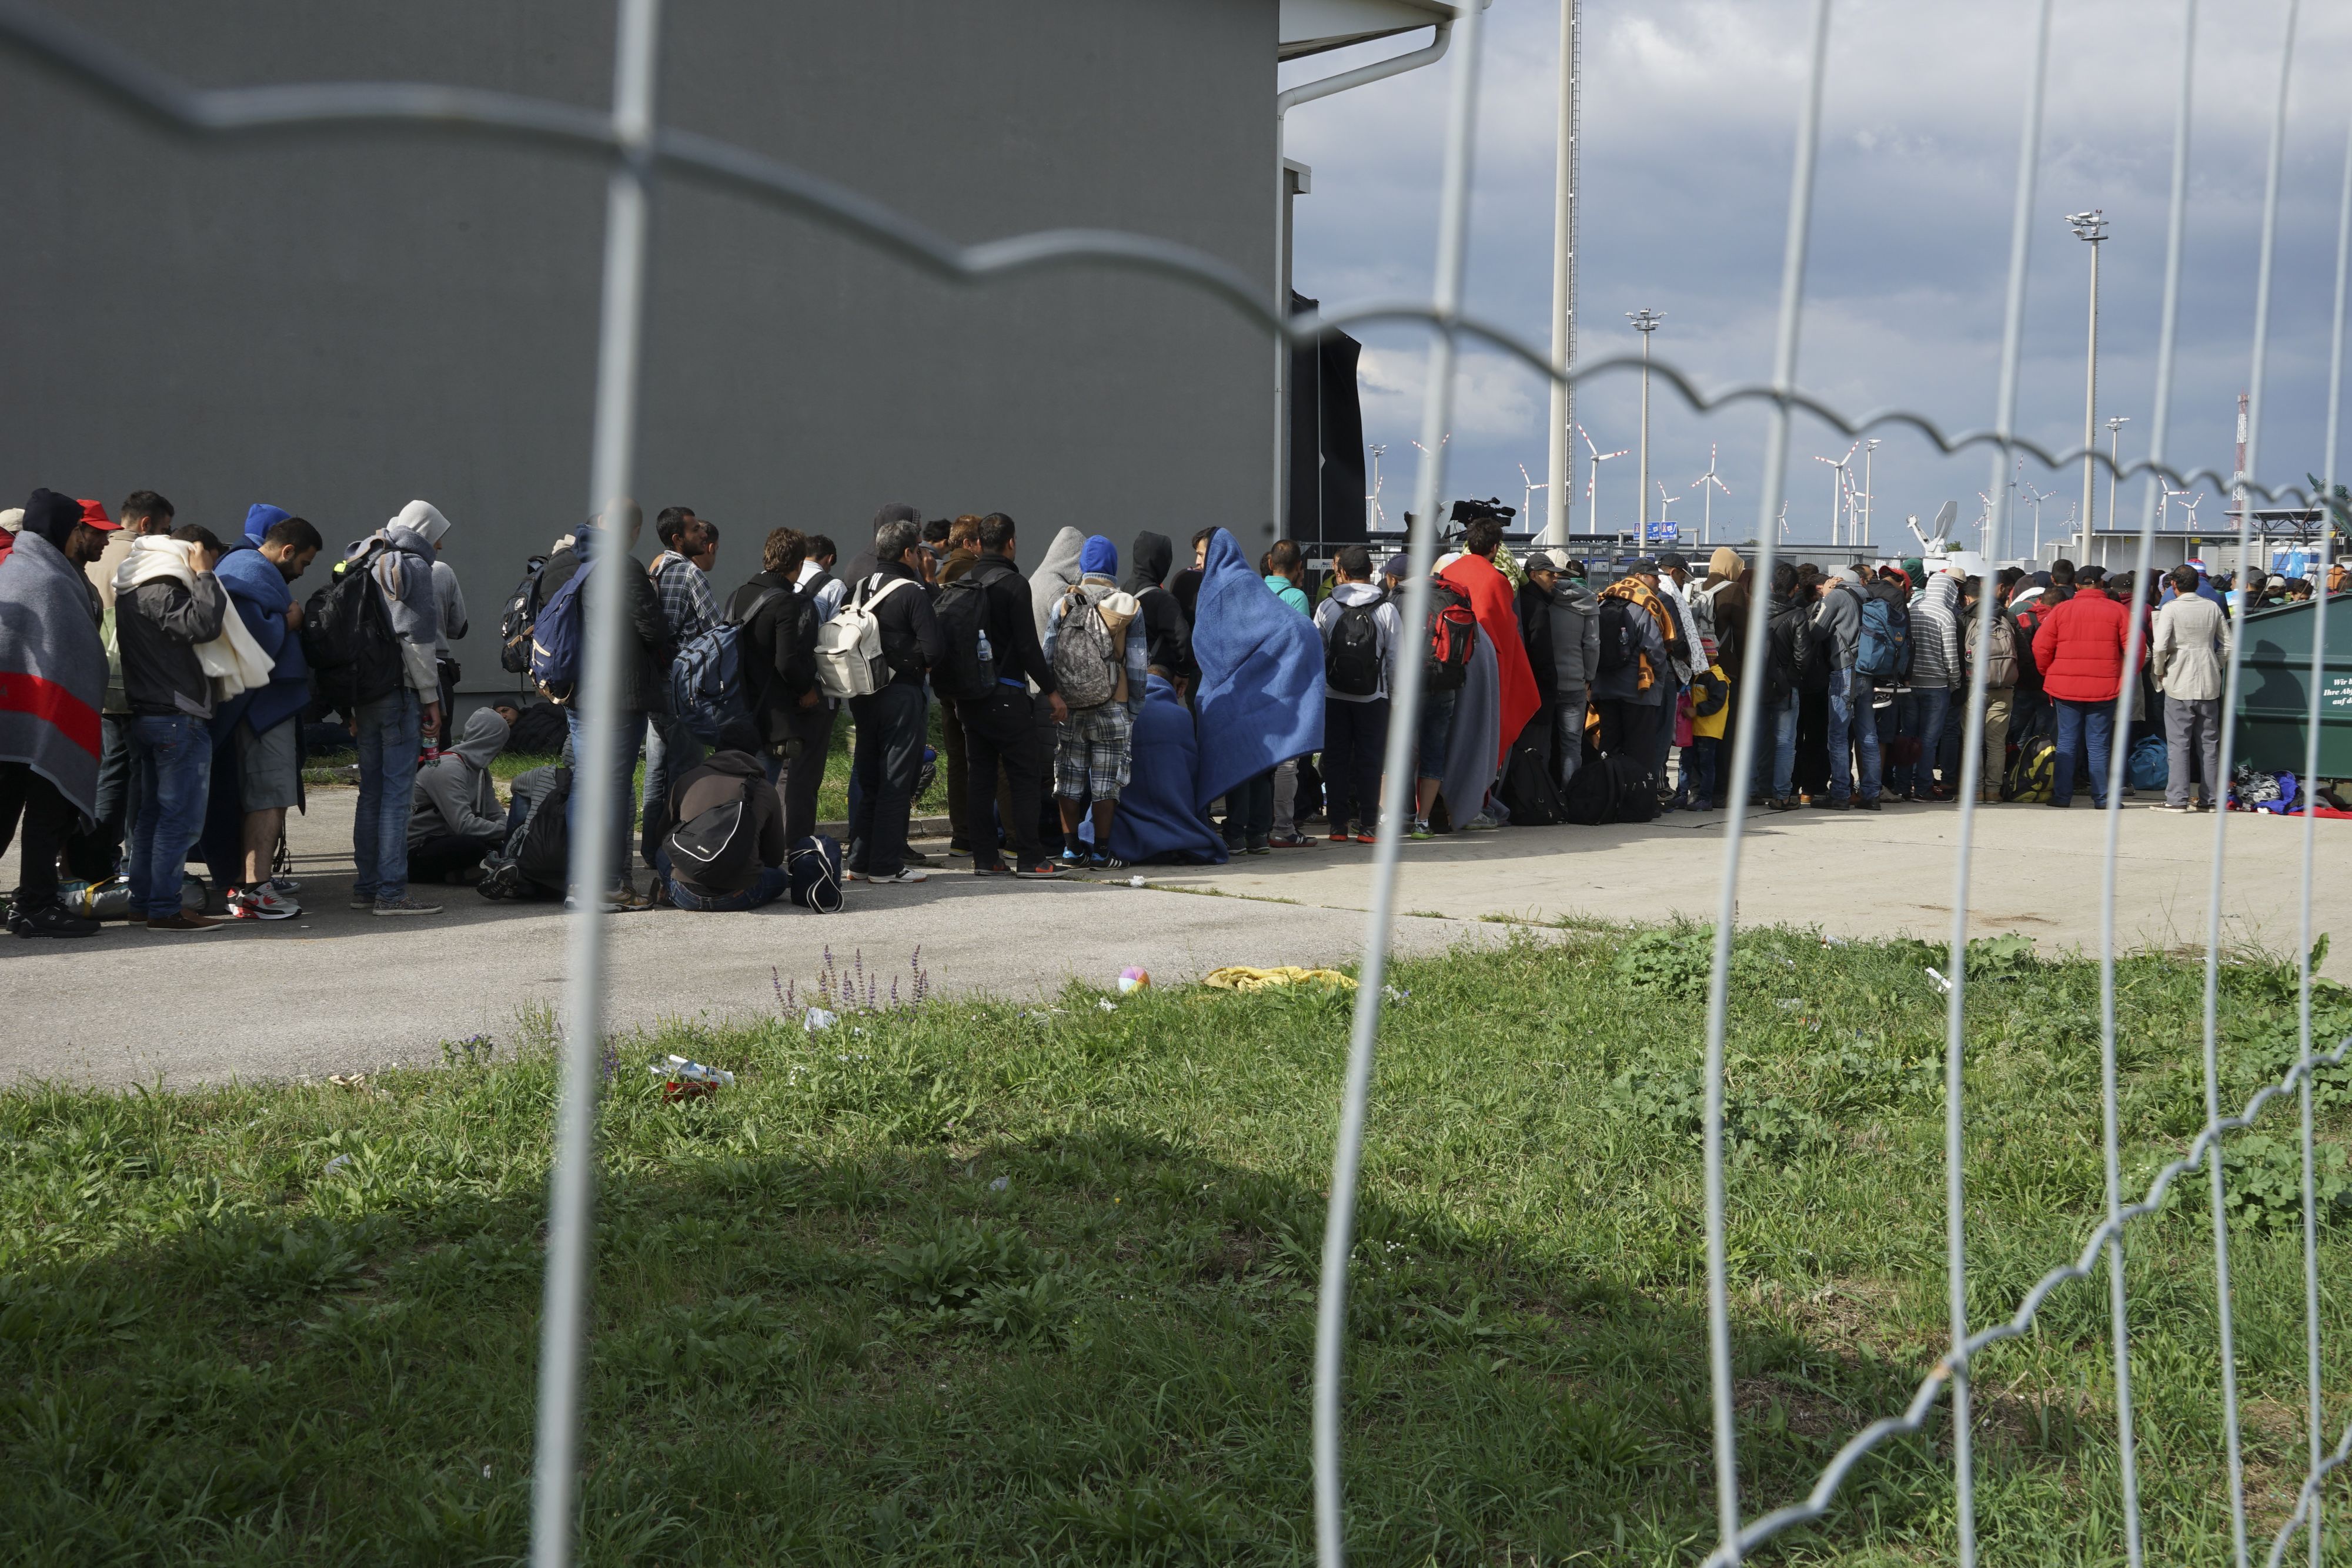 Modern colour photograph of people queueing behind a wire fence. There is a large number of people, many with bags or suitcases. They are wearing warm clothes and some are wrapped in blankets.